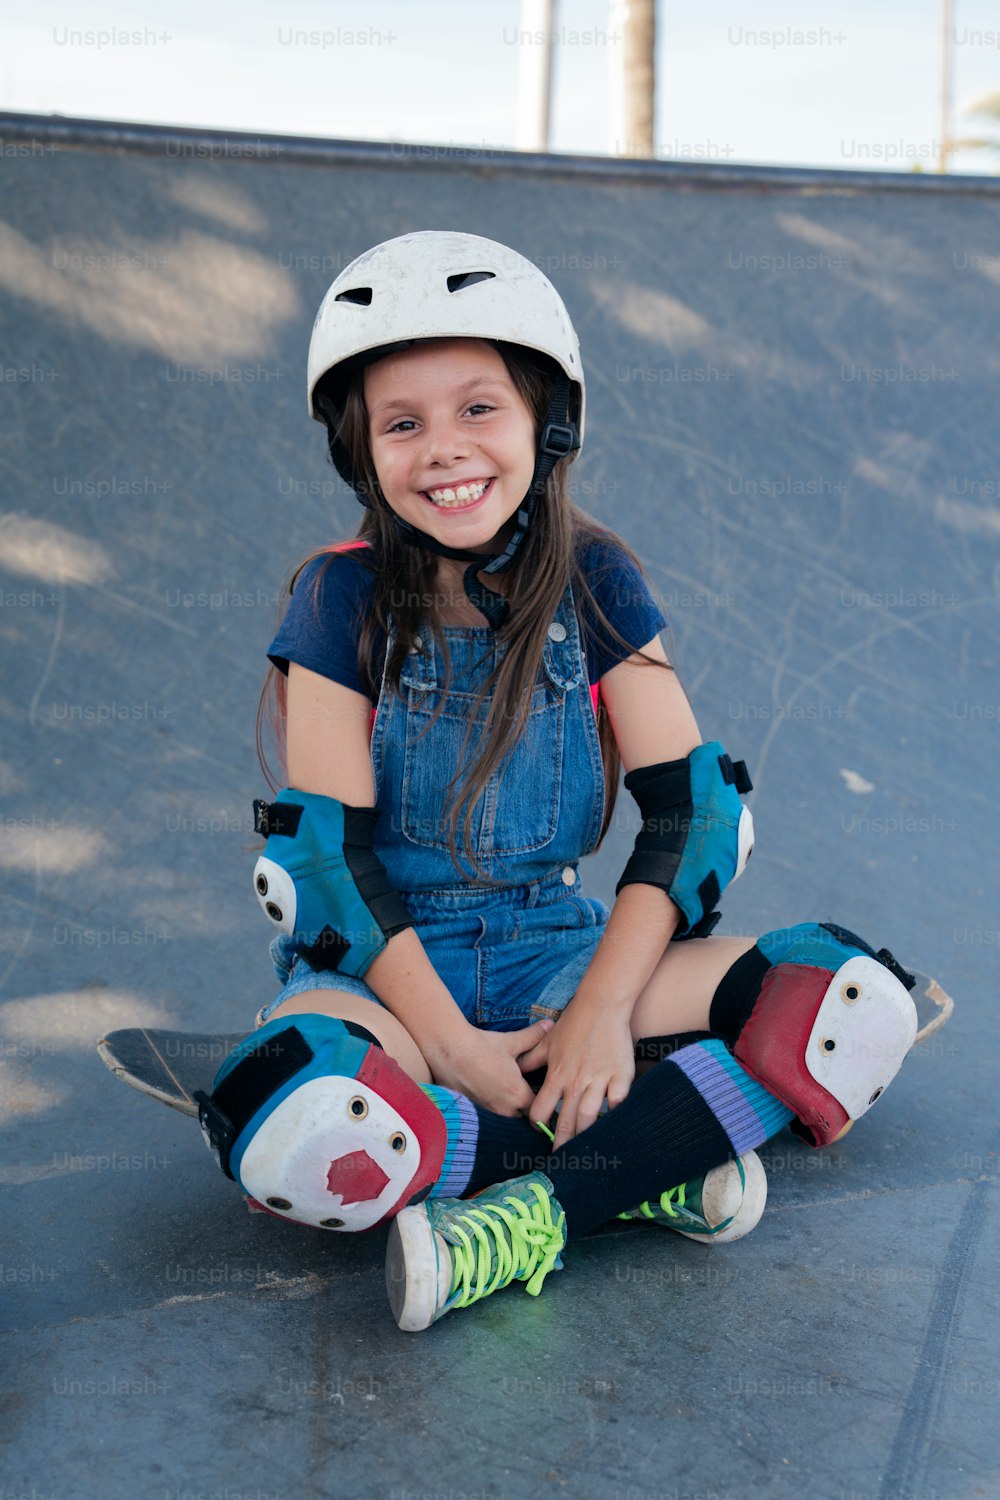 a young girl sitting on a skateboard in a skate park